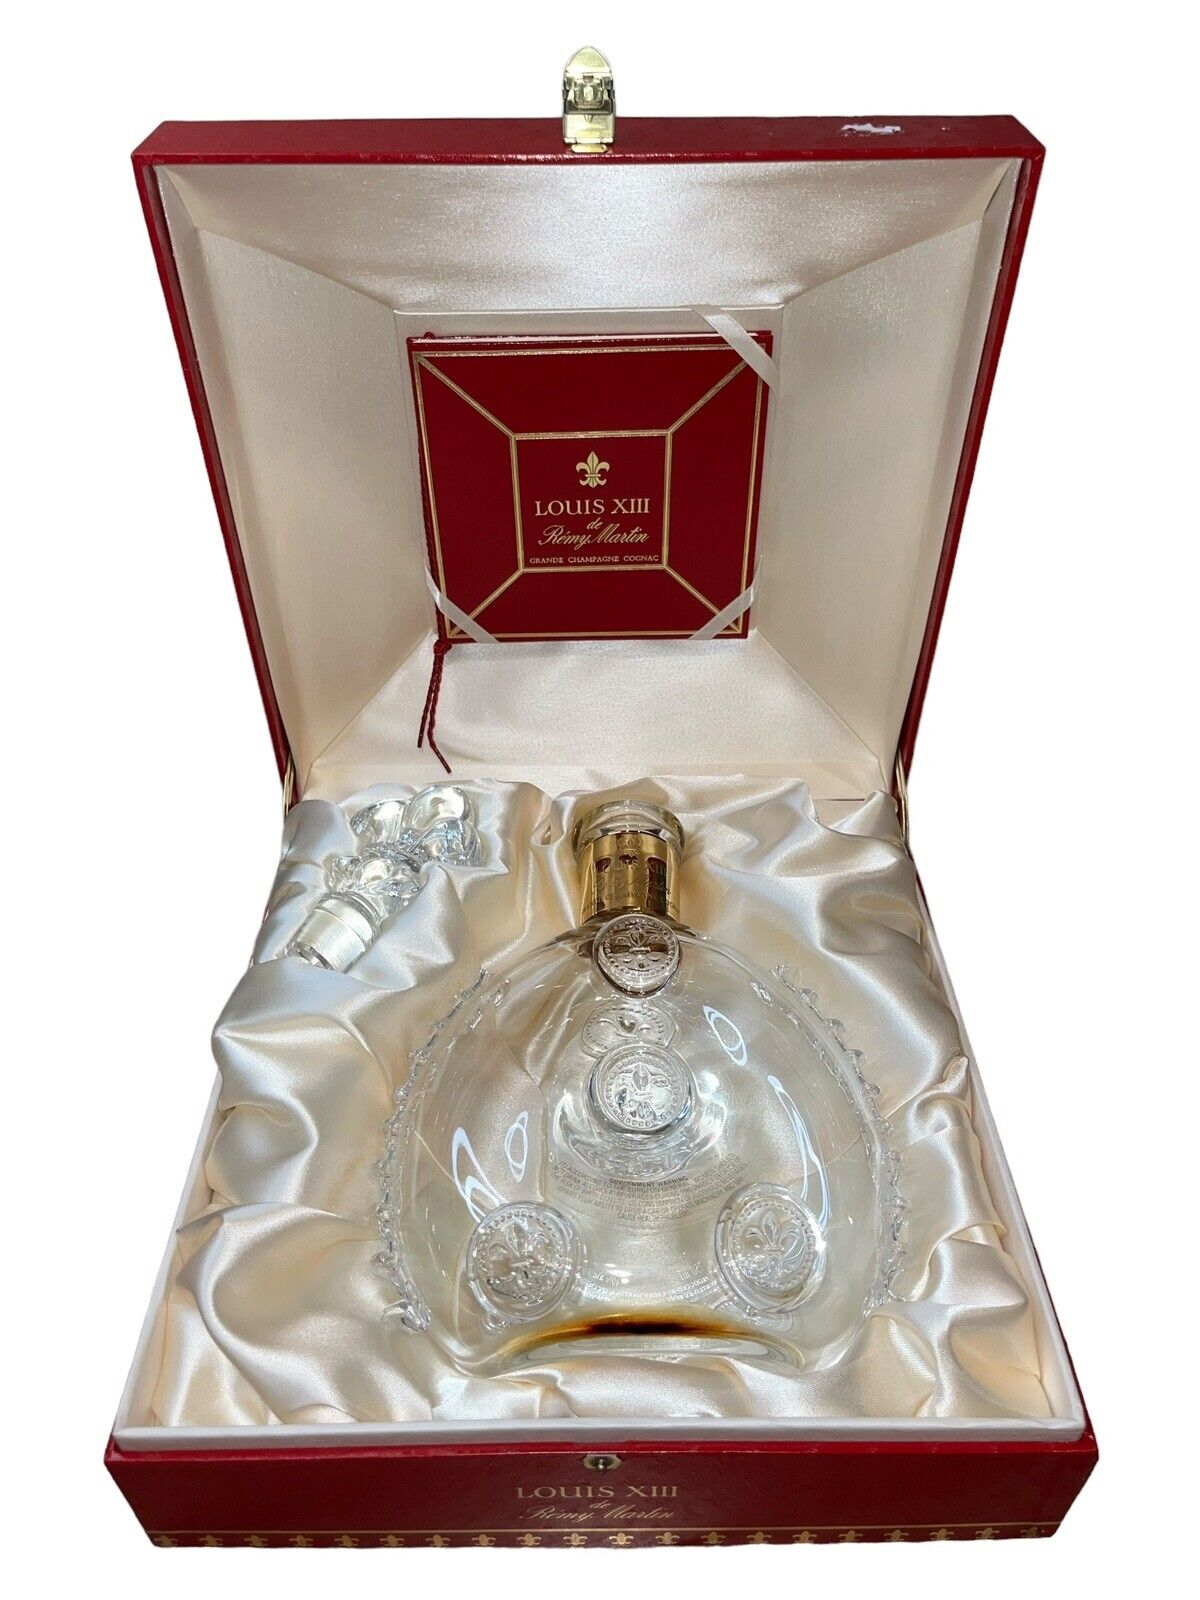 Remy Martin Louis XIII Baccarat Crystal Empty Bottle and stopper with Box